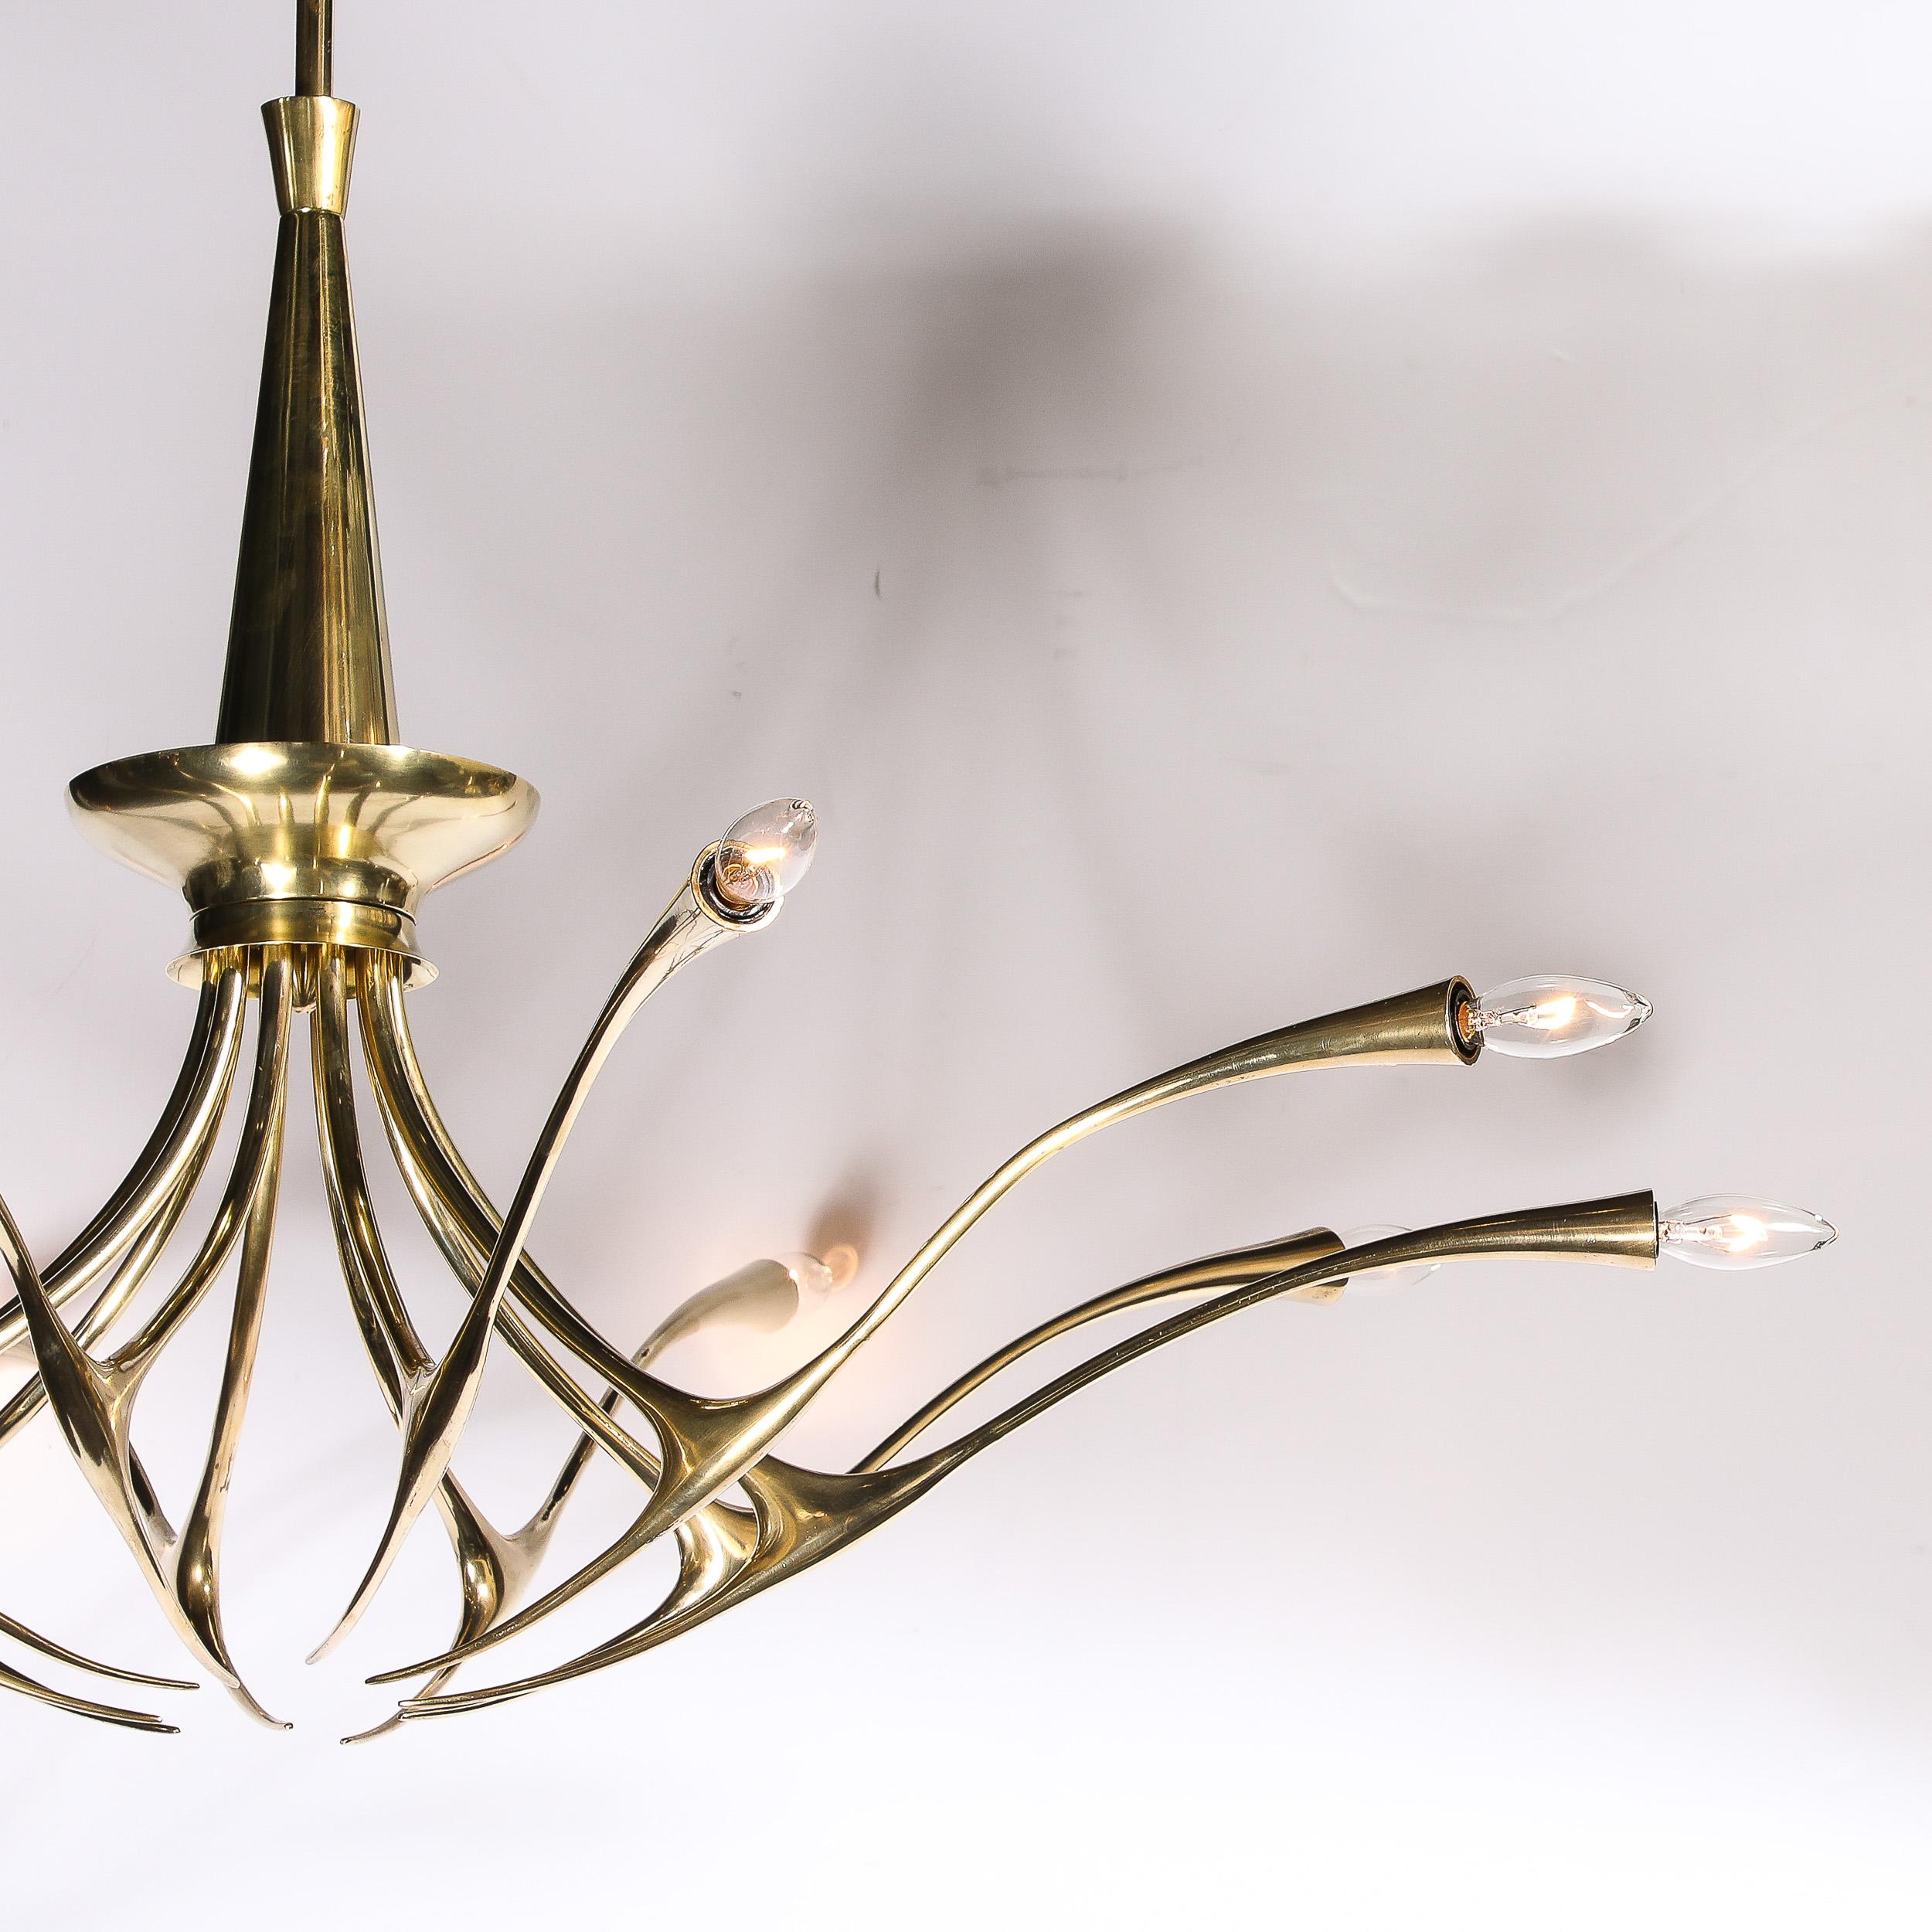 This dynamic and elegant Mid-Century Modernist 10 Arm Sculptural Brass Chandelier is designed by Oscar Torlasco for the company Lumi and originates from Italy, Circa 1955. Features a brilliant composition of ten equidistantly spaced sculptural arms,